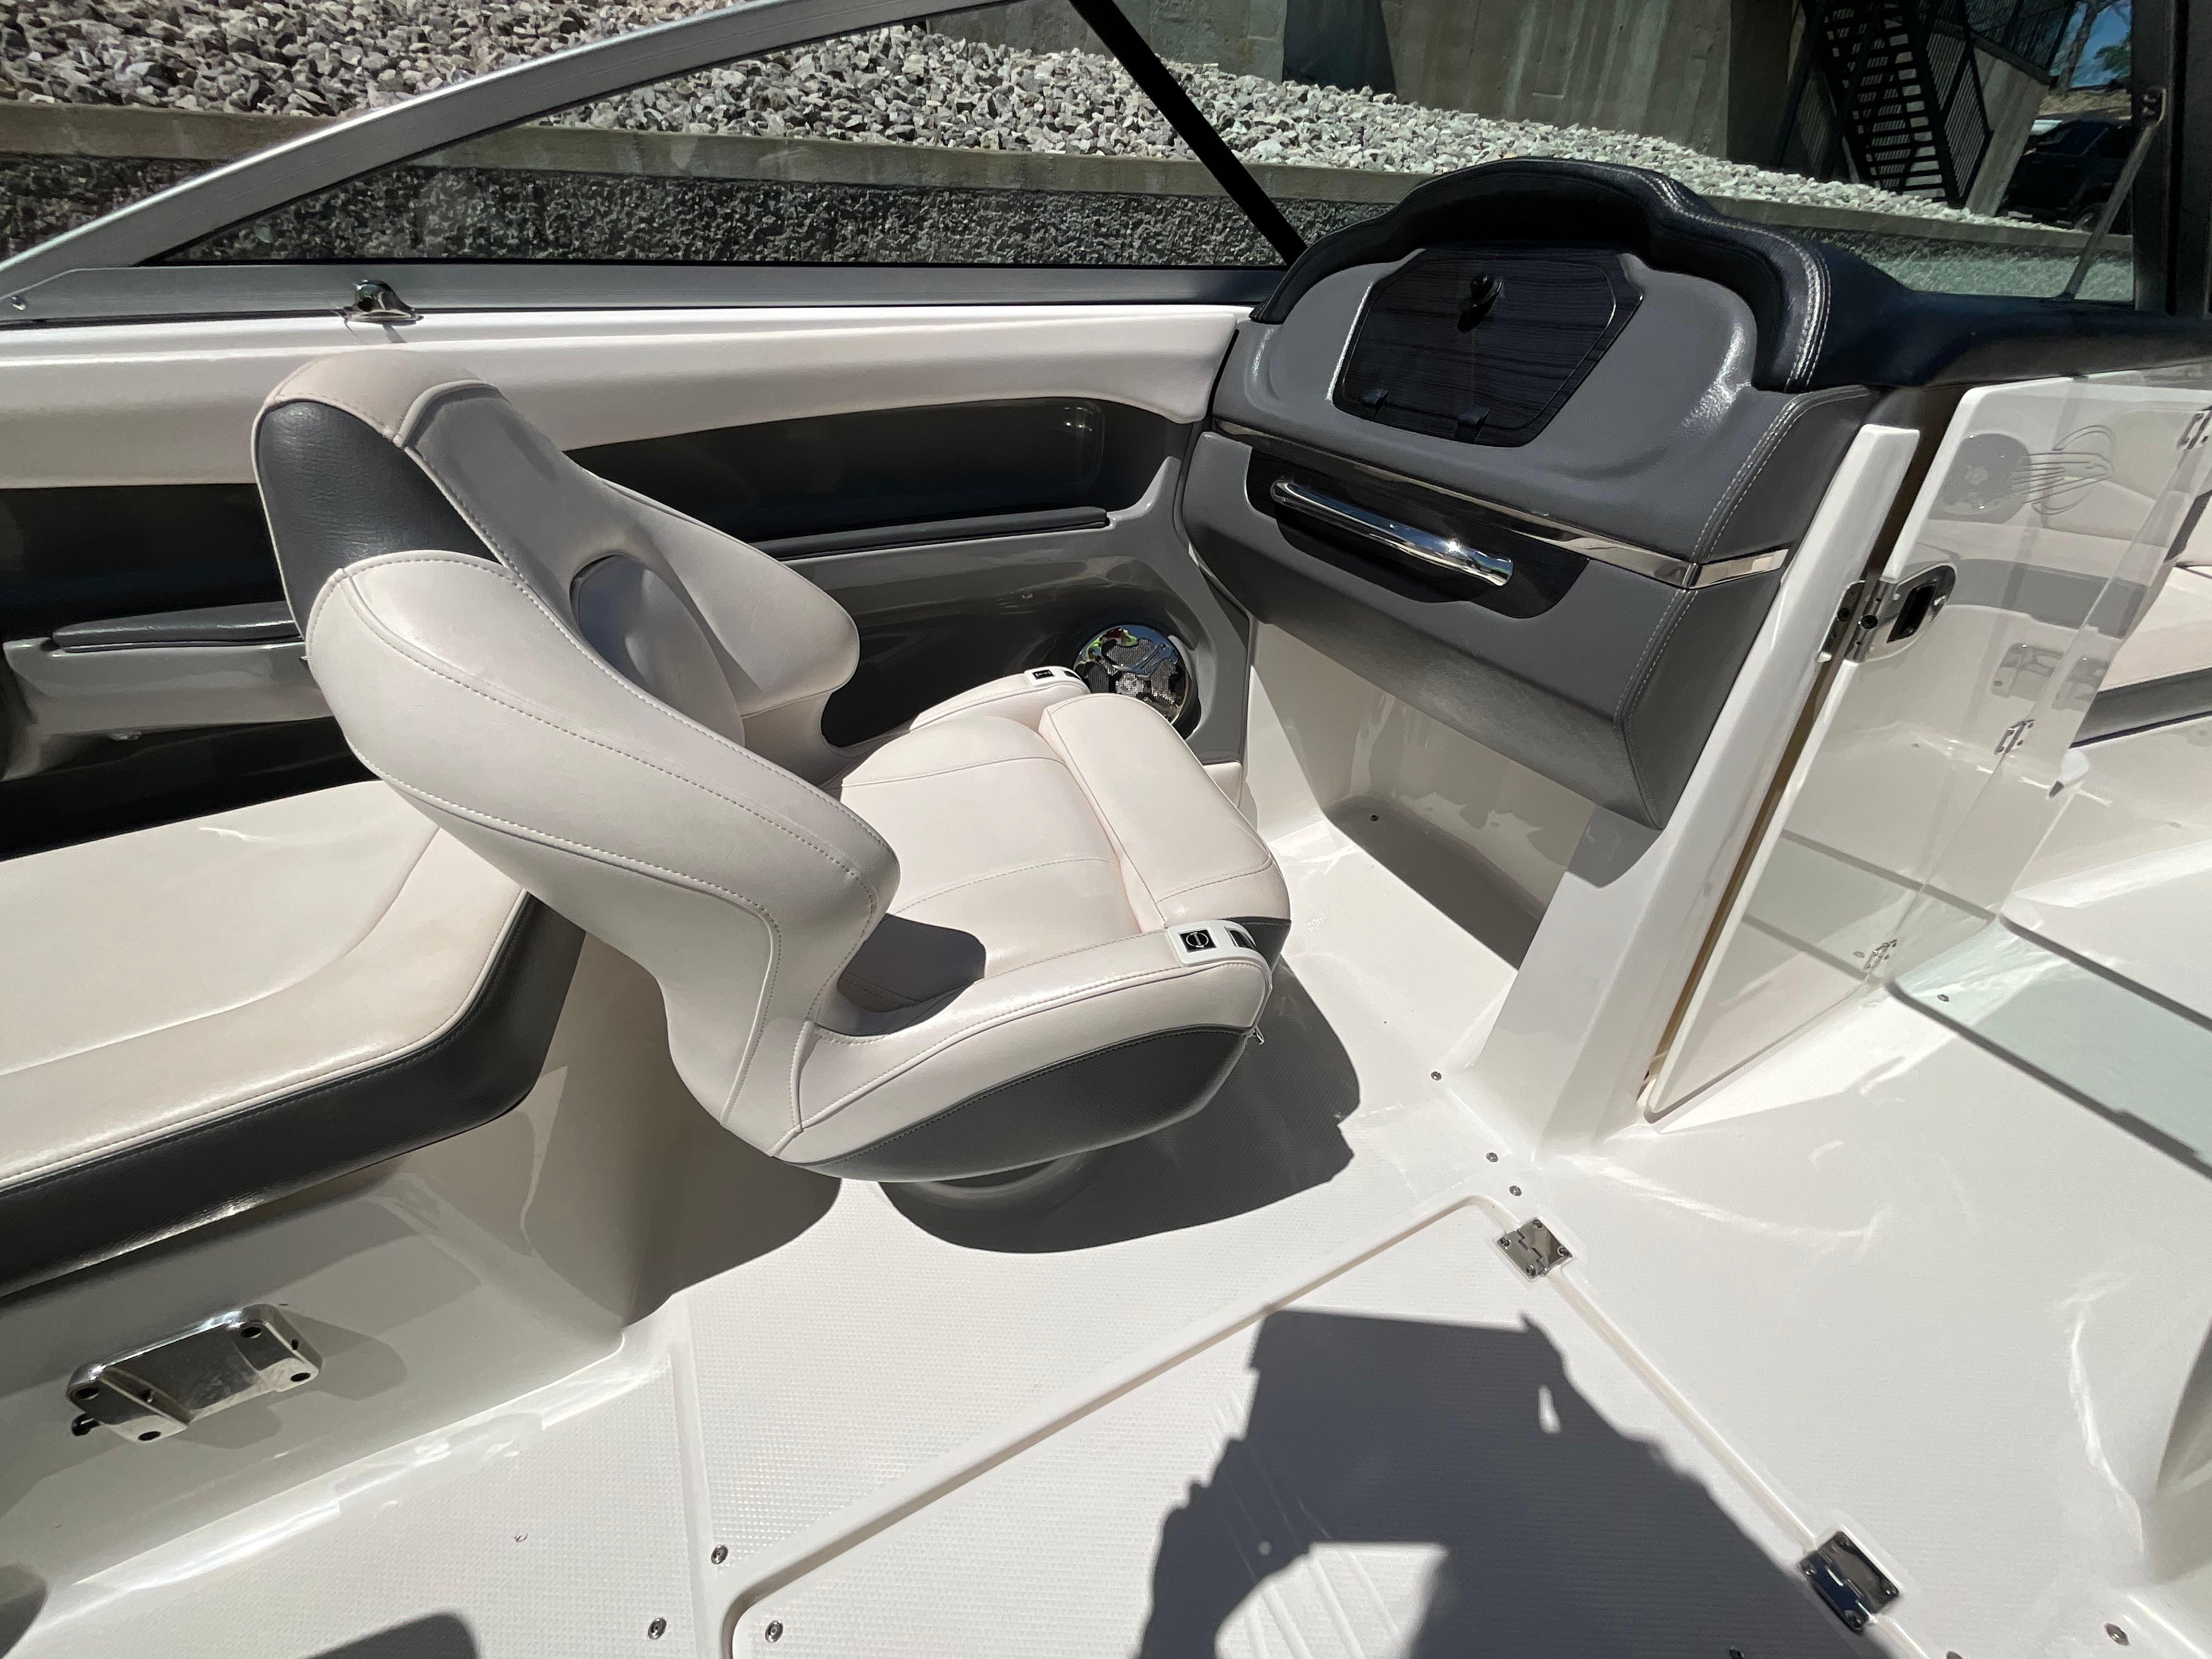 2017 Chaparral 226 SSI Deluxe